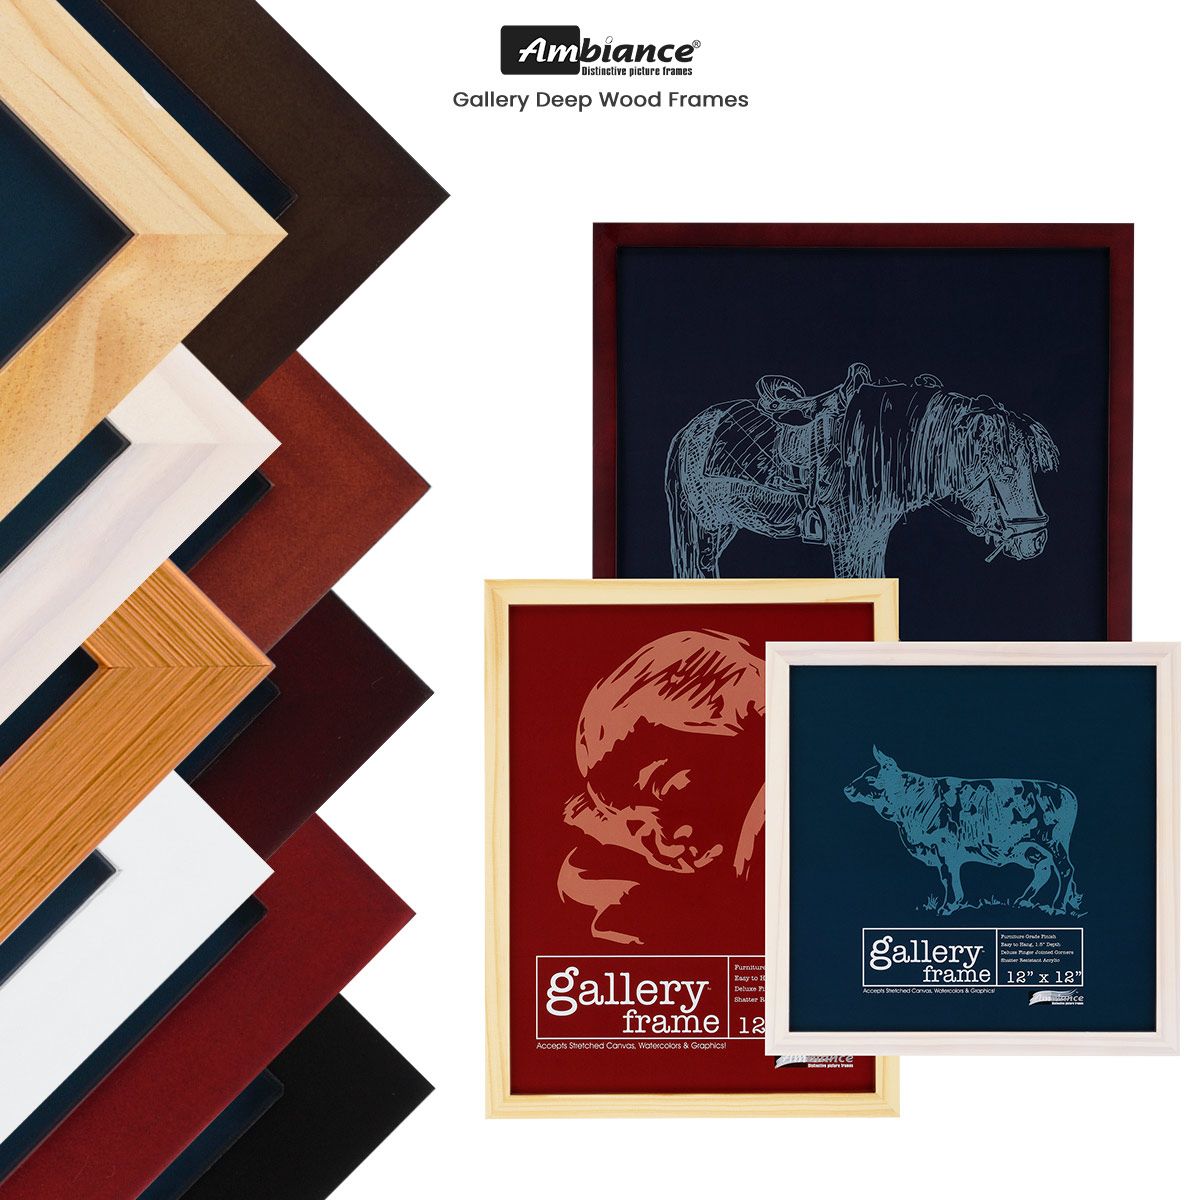 Ambiance Gallery 1-1/2 Deep Wood Frames